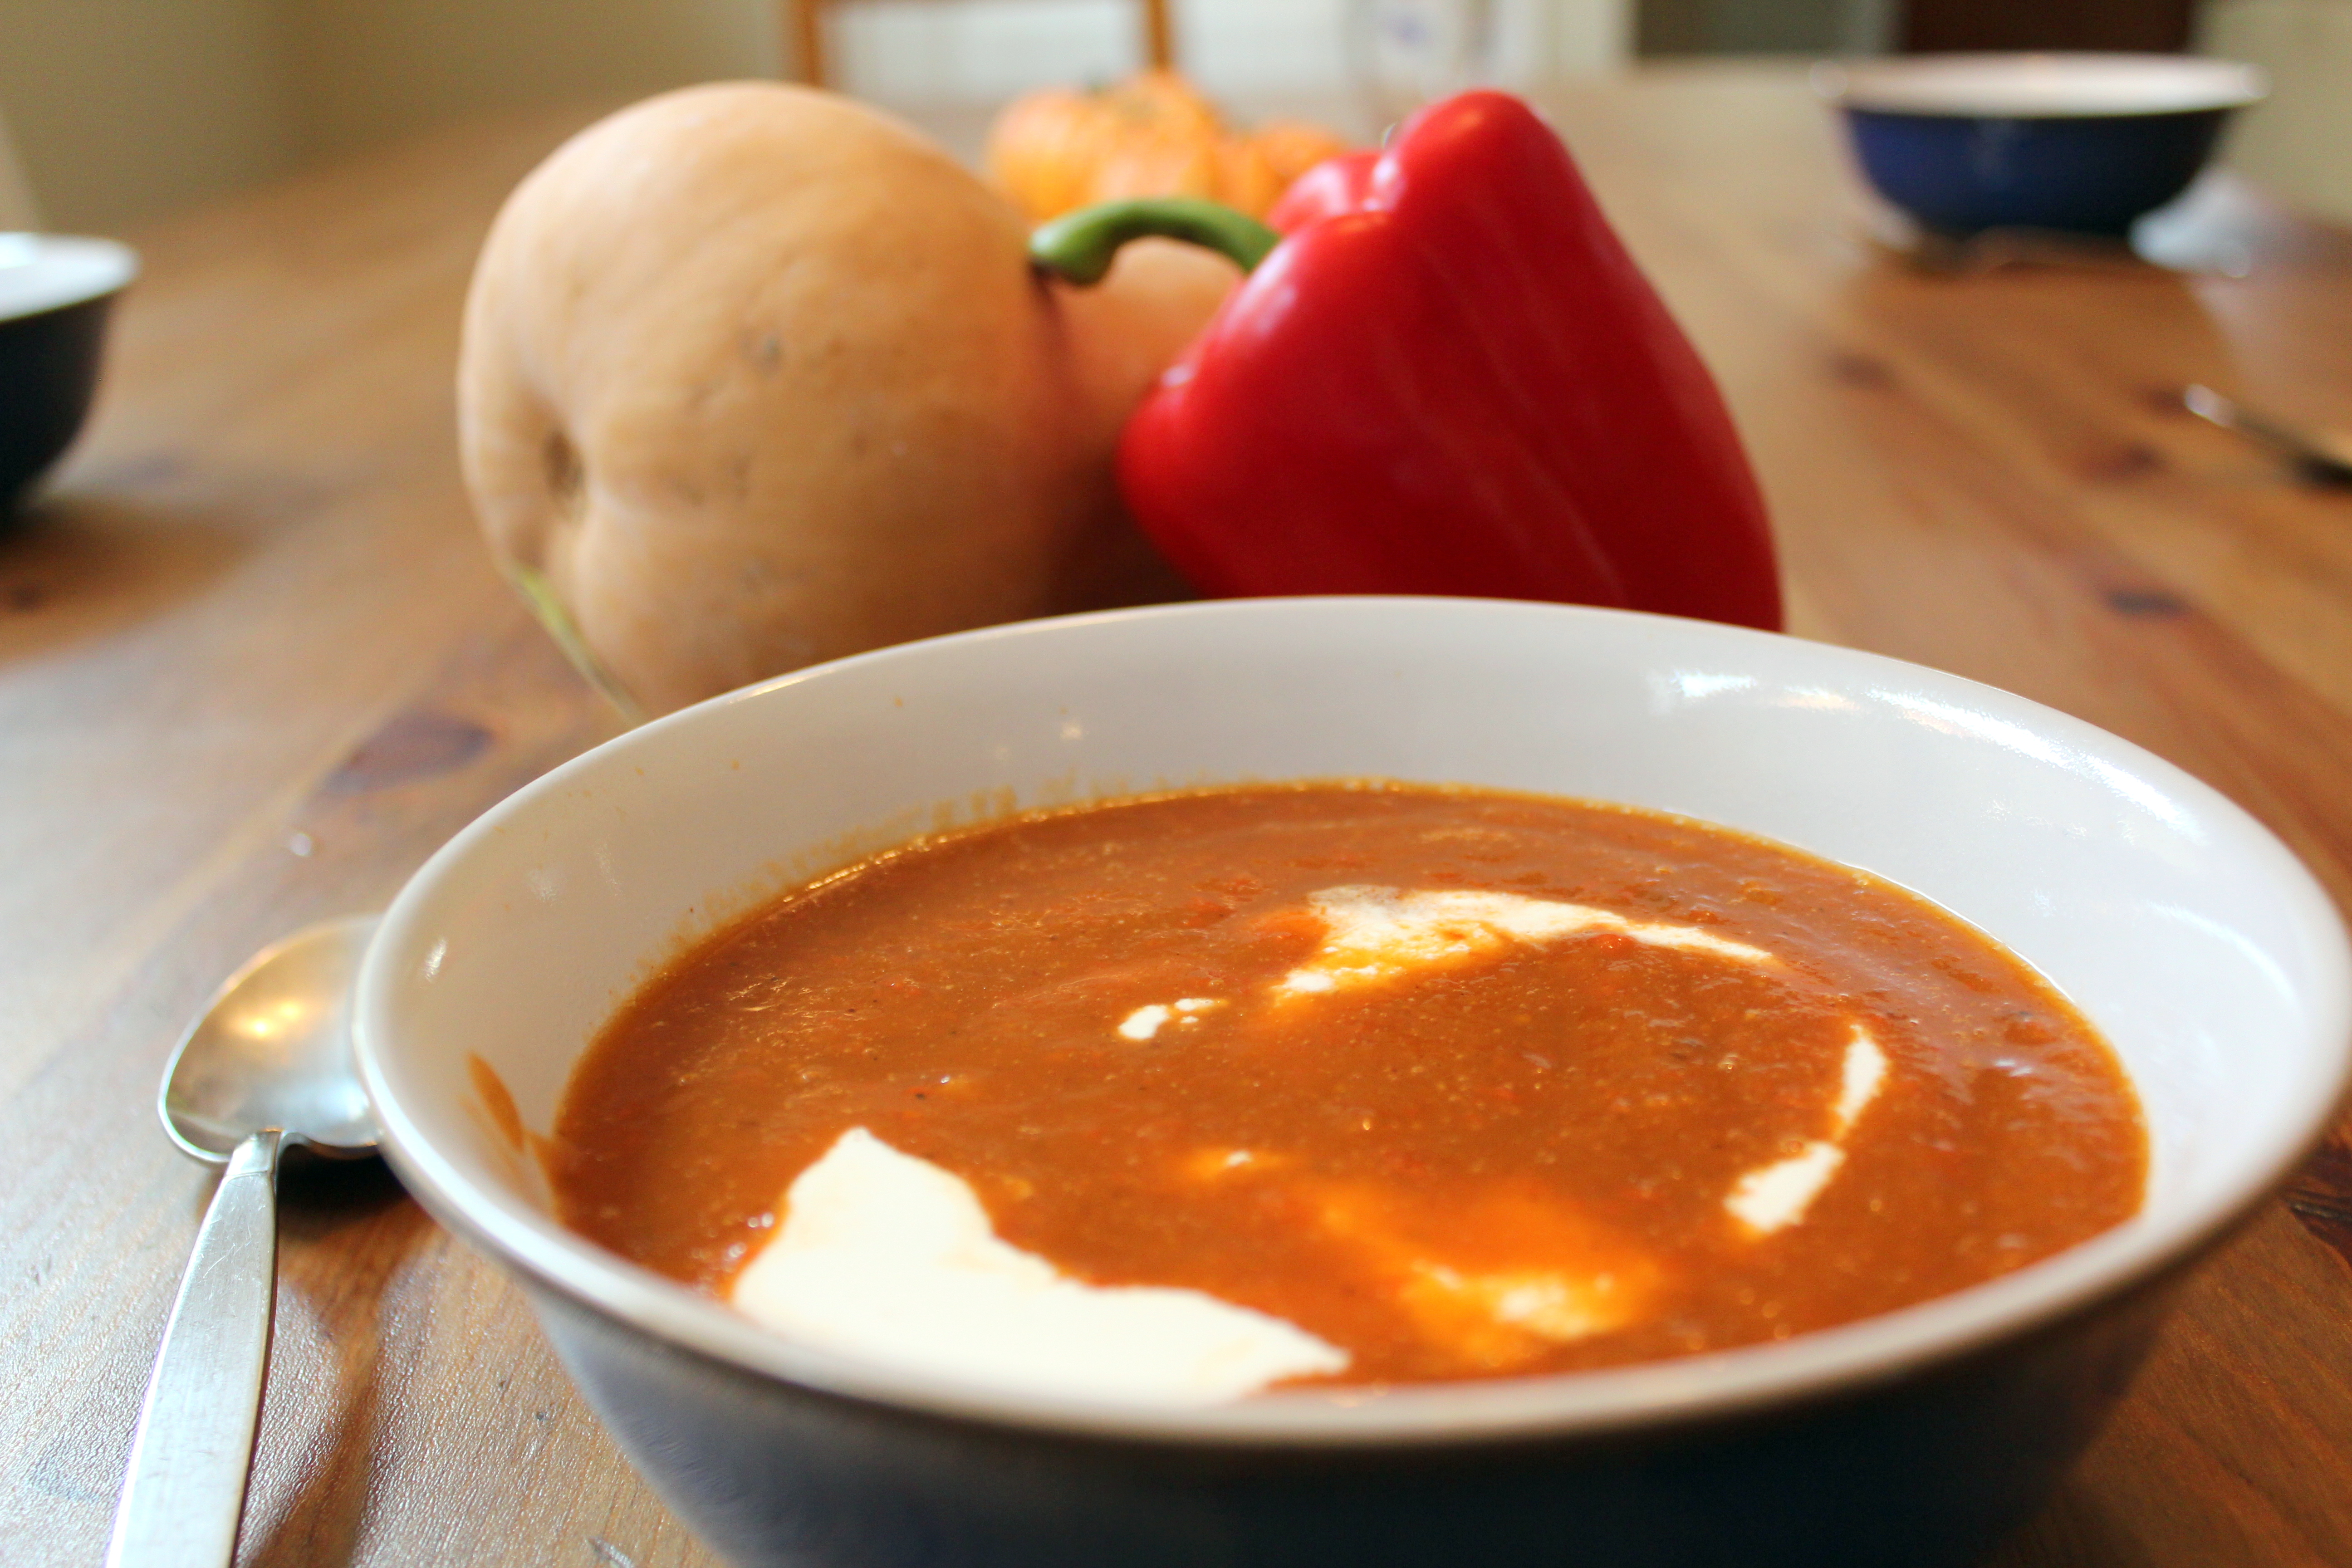 Rich Roasted Pepper and Butternut Squash Soup